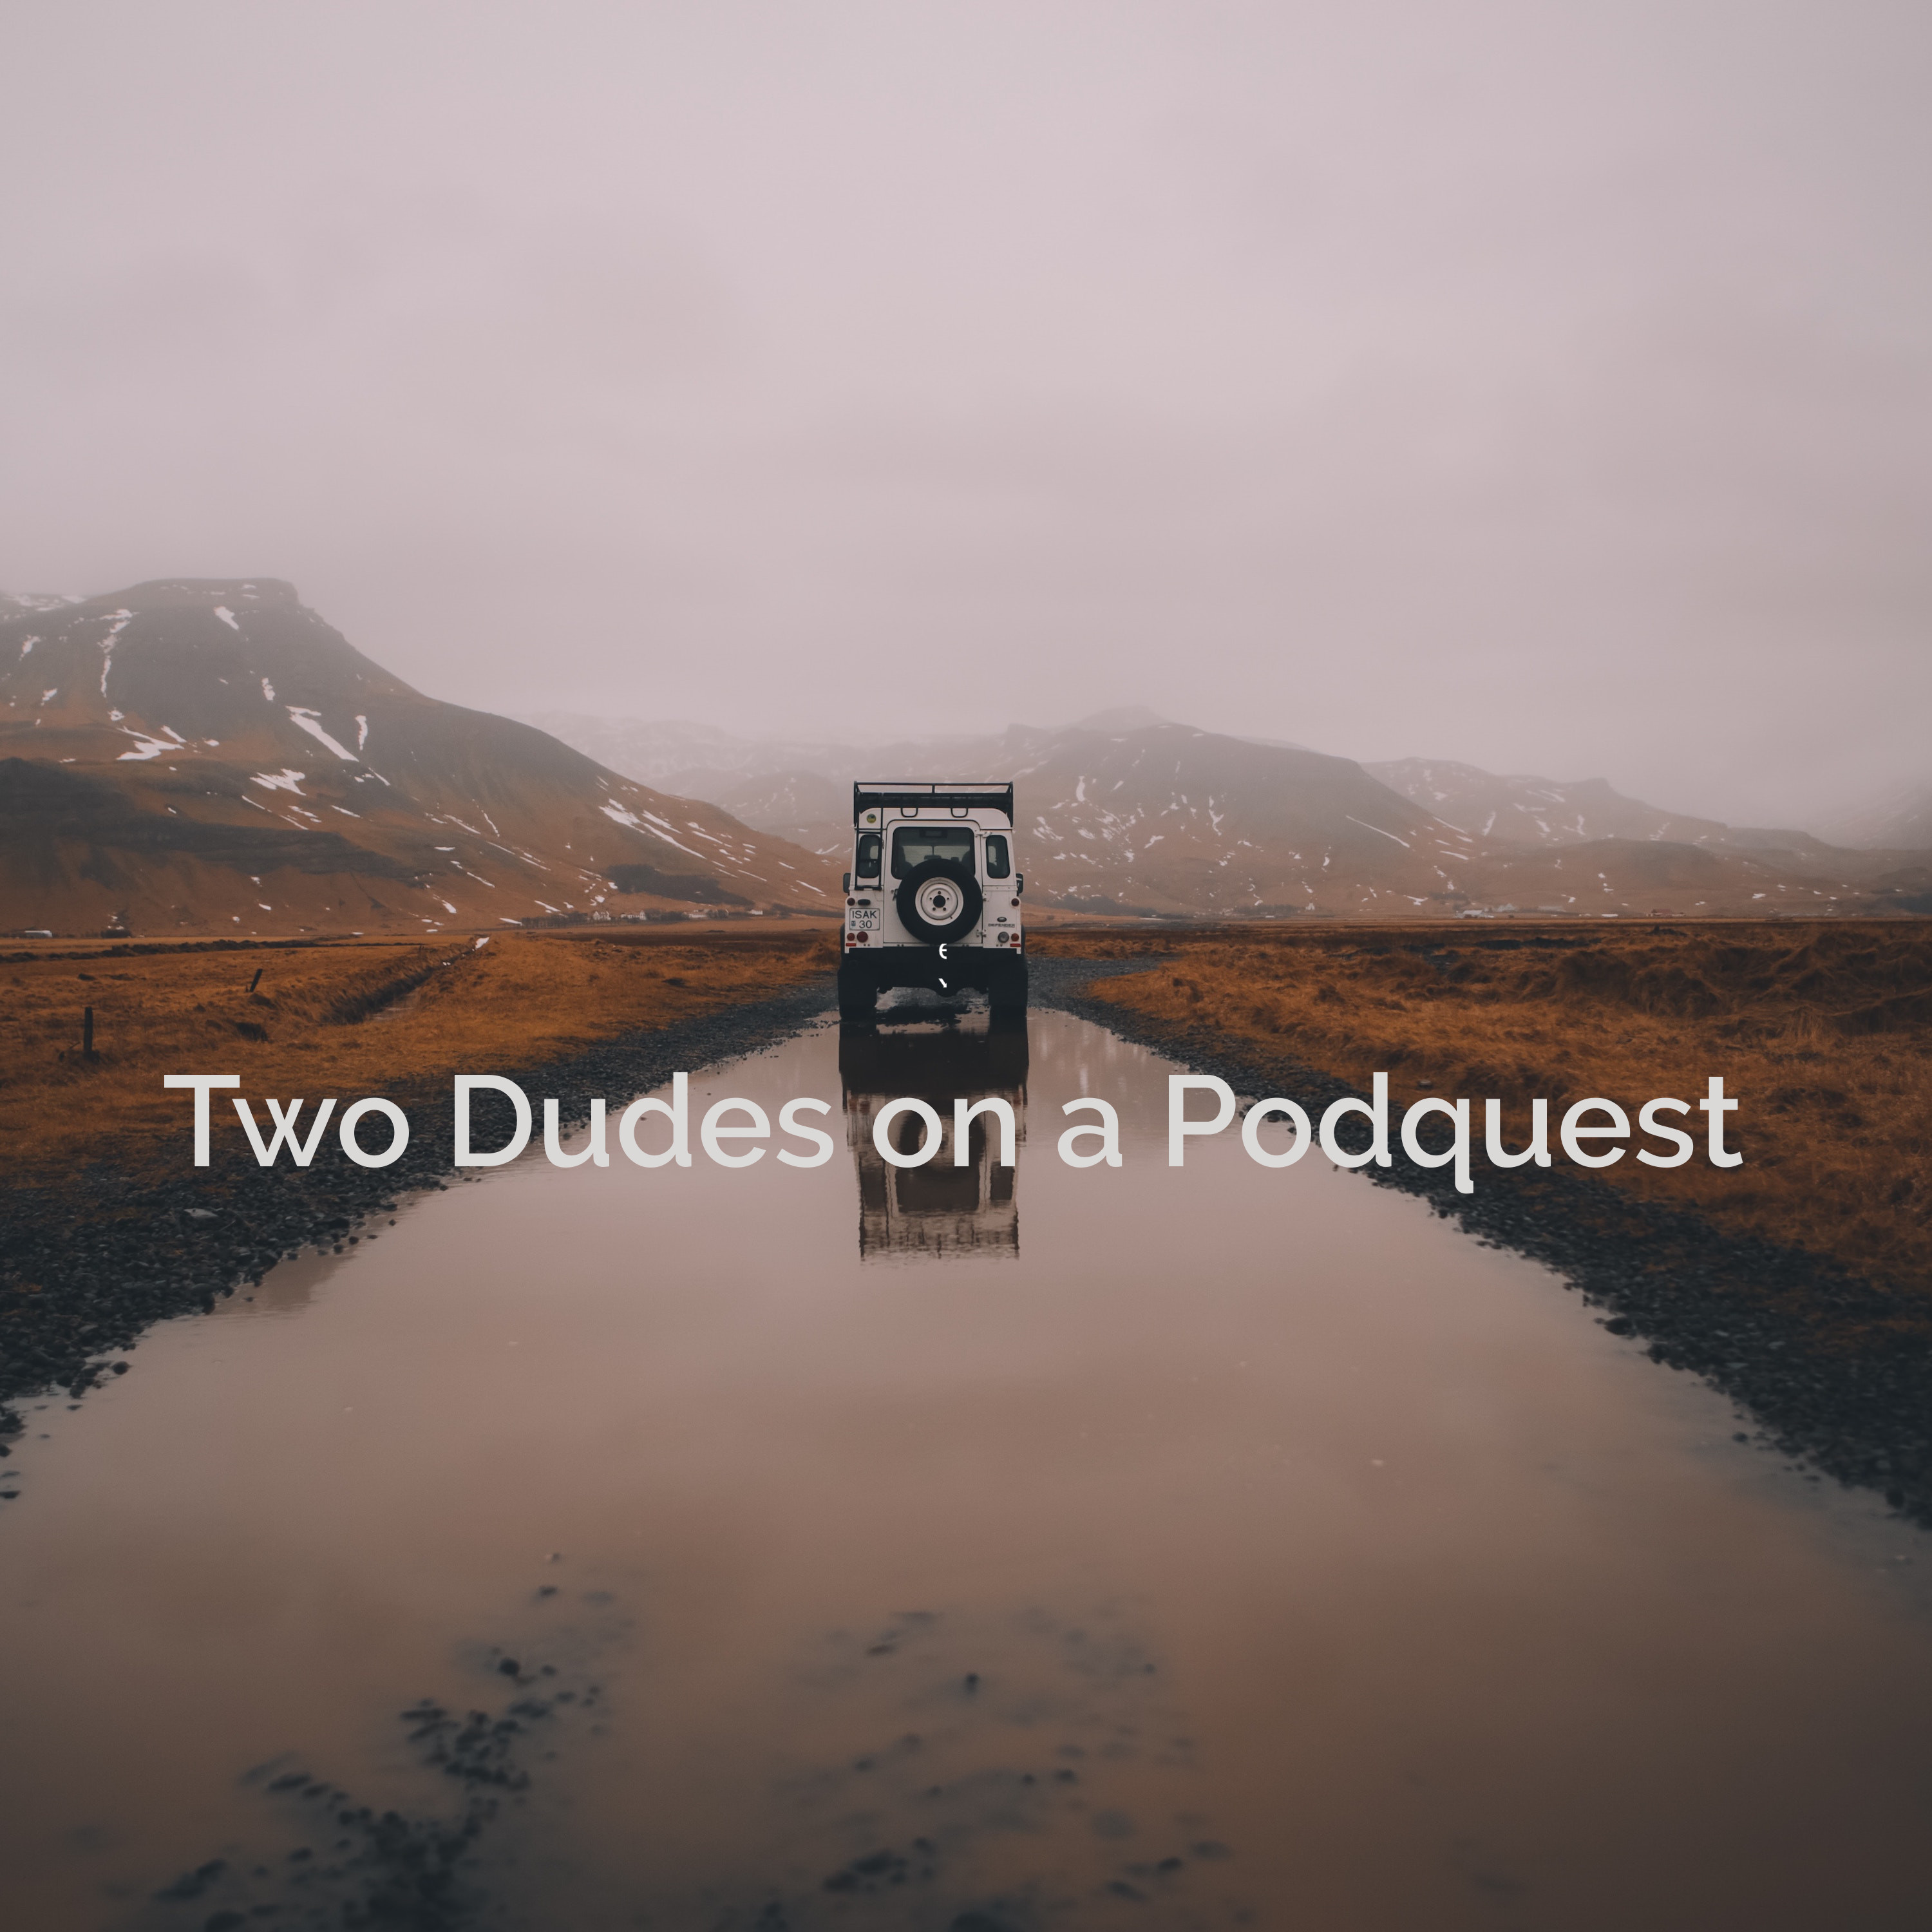 Two Dudes on a Podquest